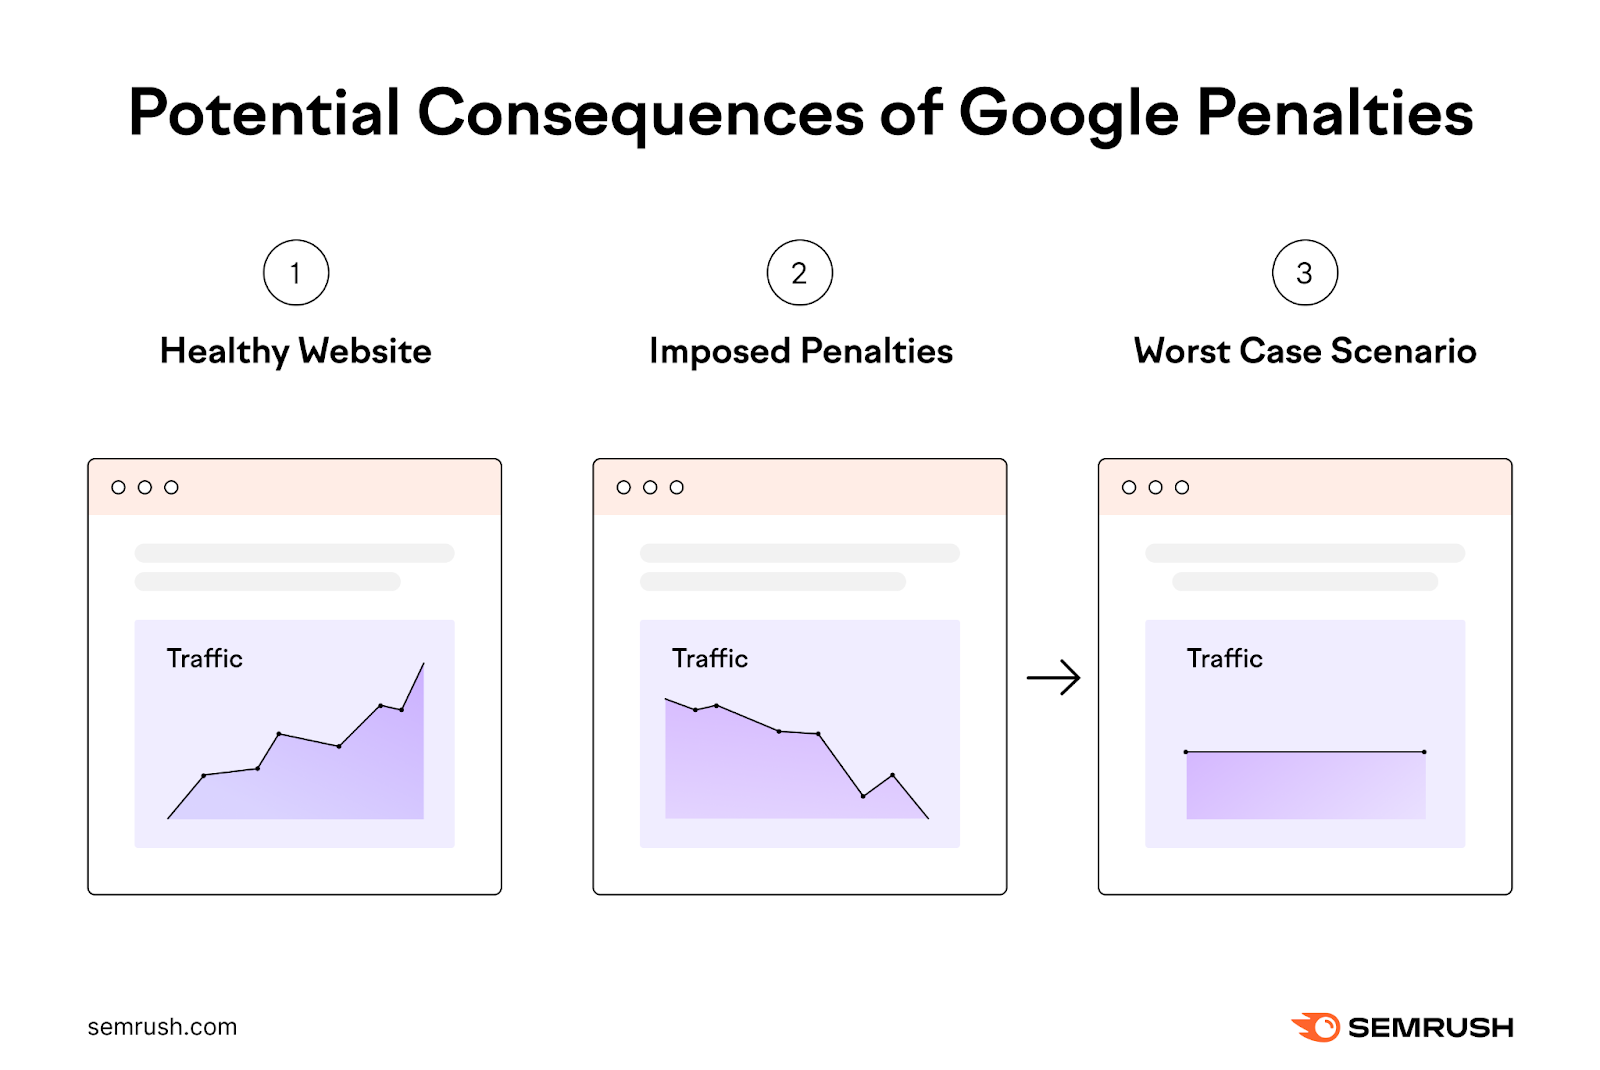 healthy website shows increased traffic while imposed penalties shows a sharp decline in traffic. The worst case scenario is traffic flatlining.